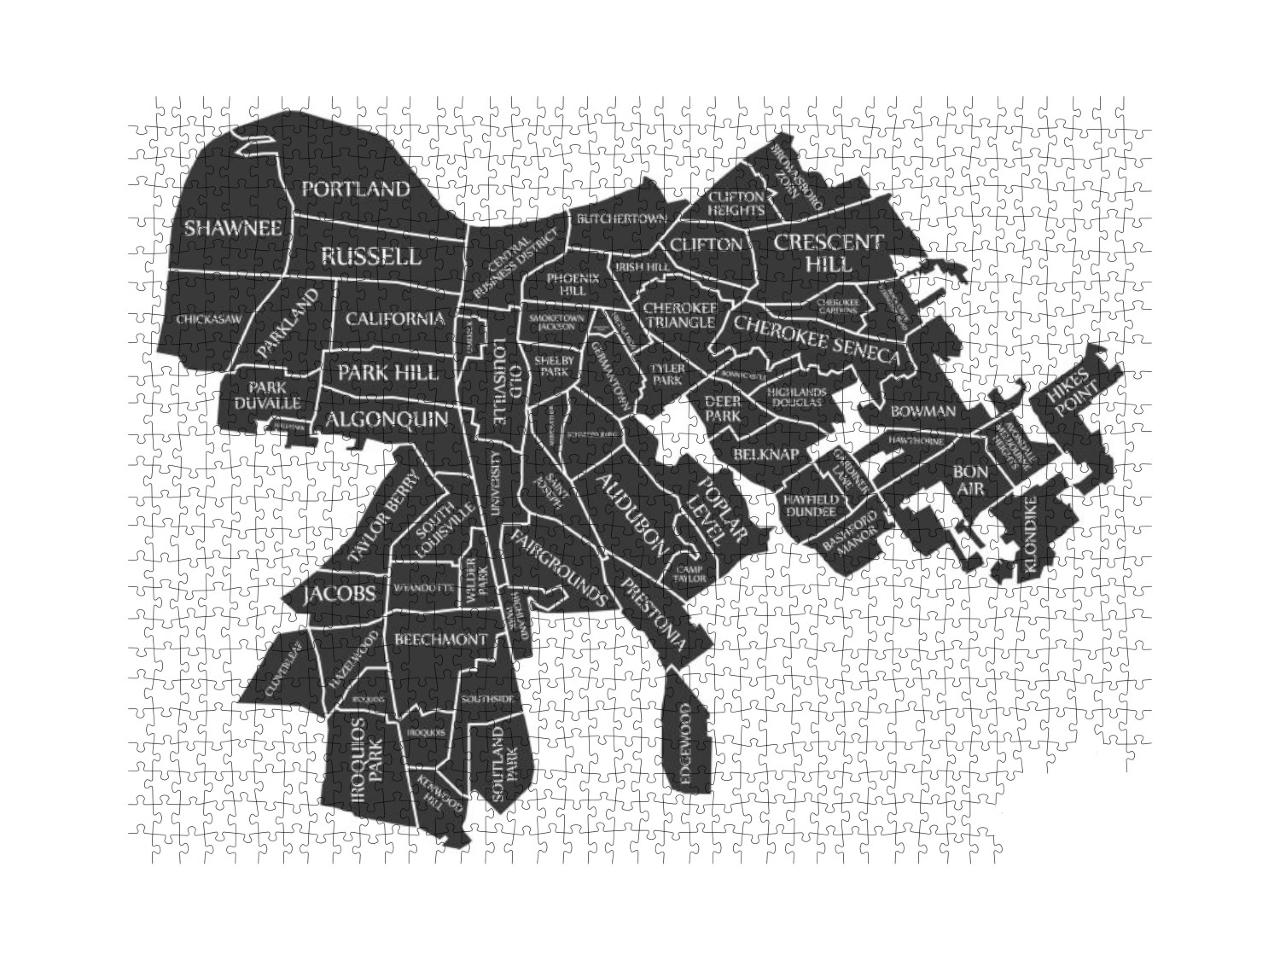 Louisville Kentucky City Map USA Labelled Black Illustrati... Jigsaw Puzzle with 1000 pieces